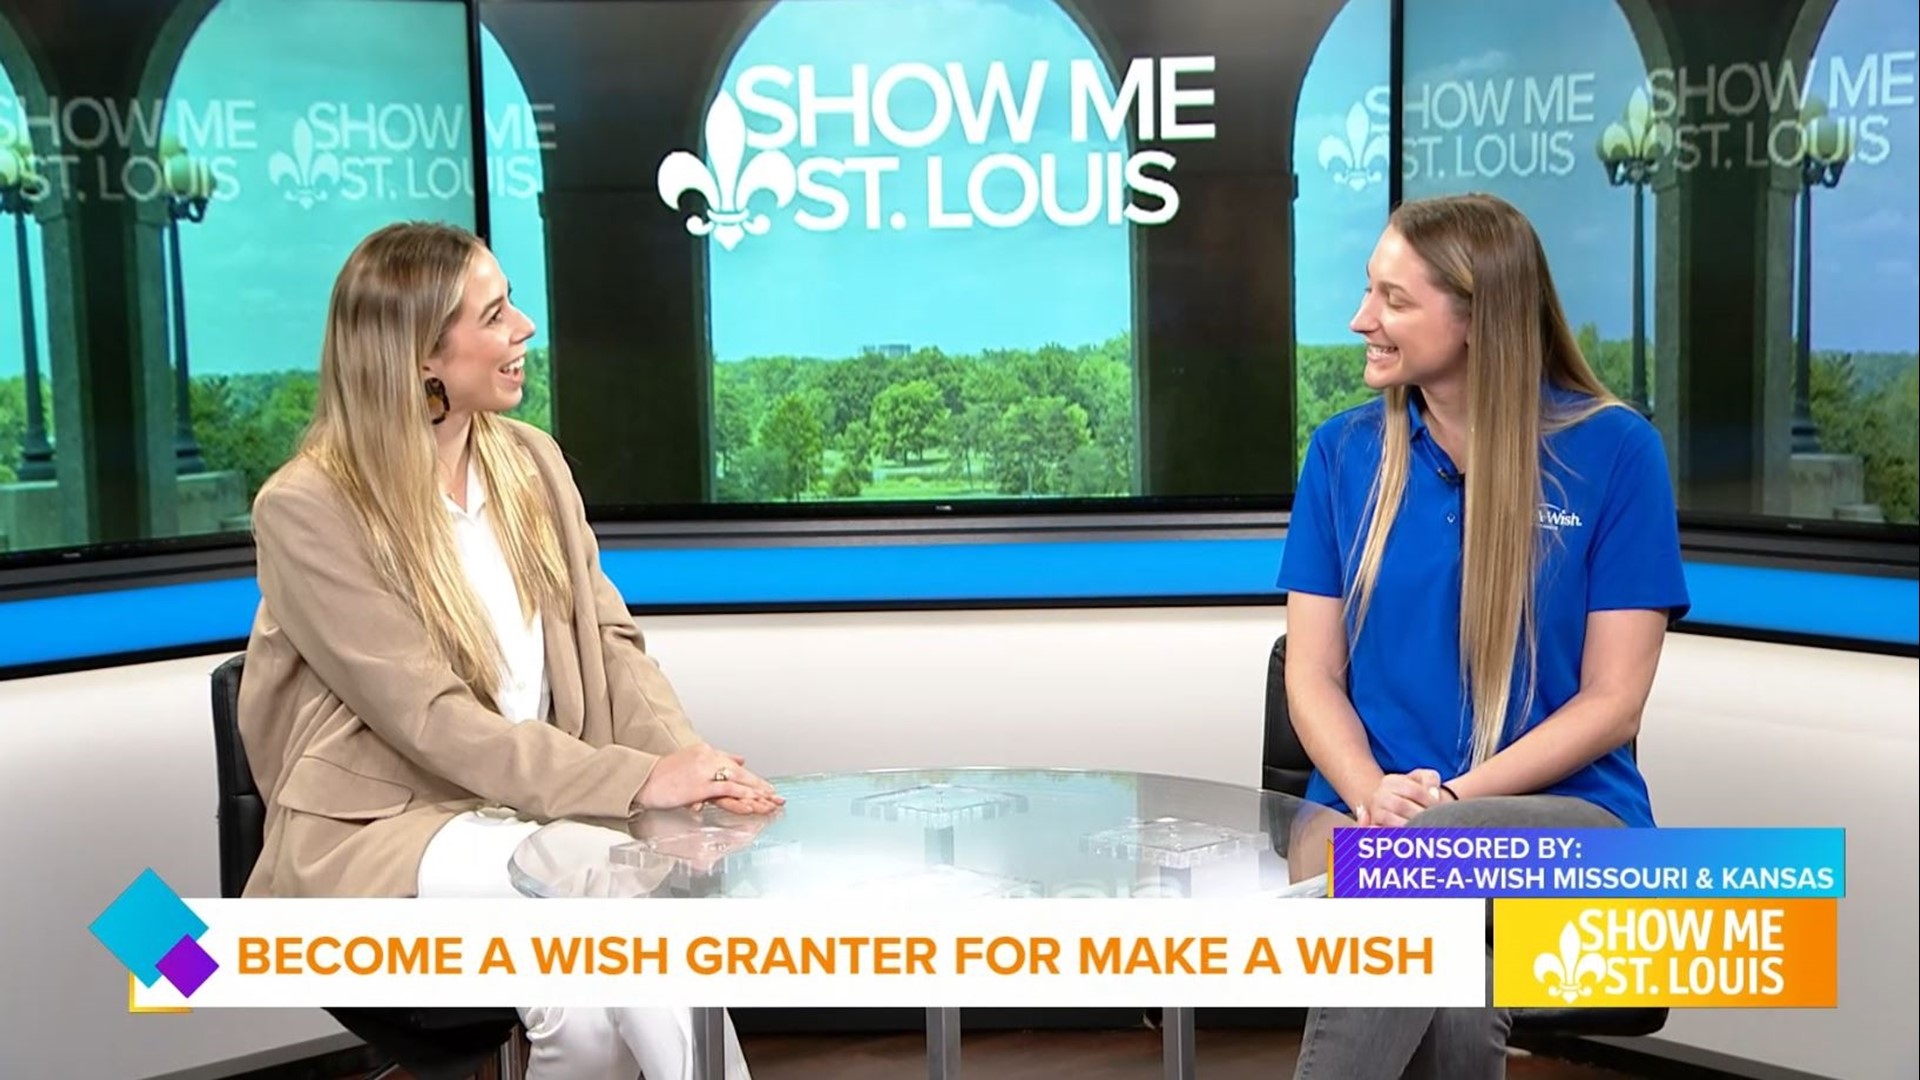 Looking to volunteer in the New Year? Make-A-Wish is looking for volunteers to help grant wishes to over 600 children.